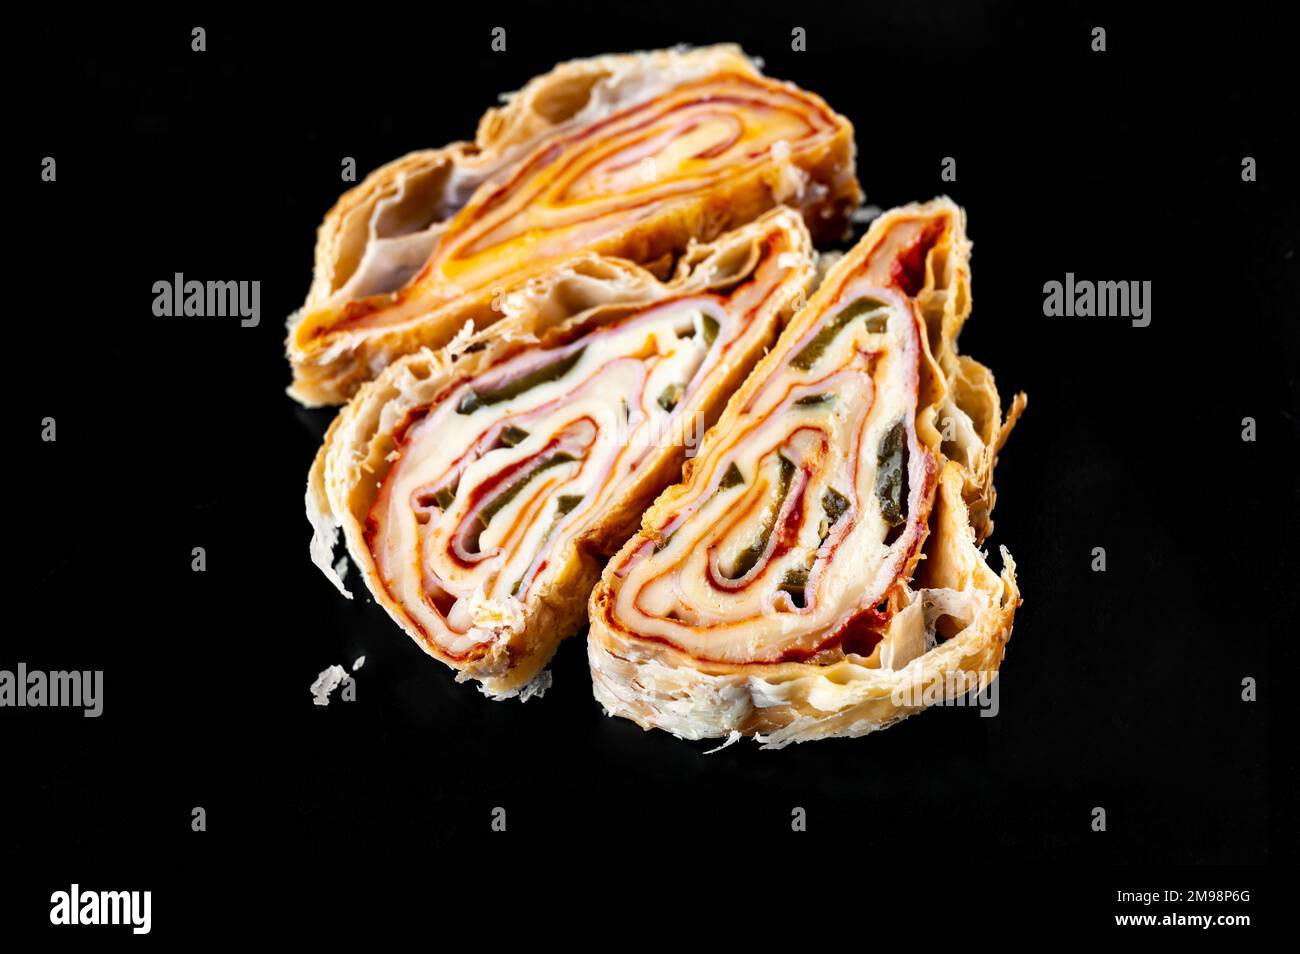 Three piece of sliced salty rolled pastry with ham, cheese and jalapenos on black background, closeup. Nice layers of food on the cut. Appetizer, snac Stock Photo